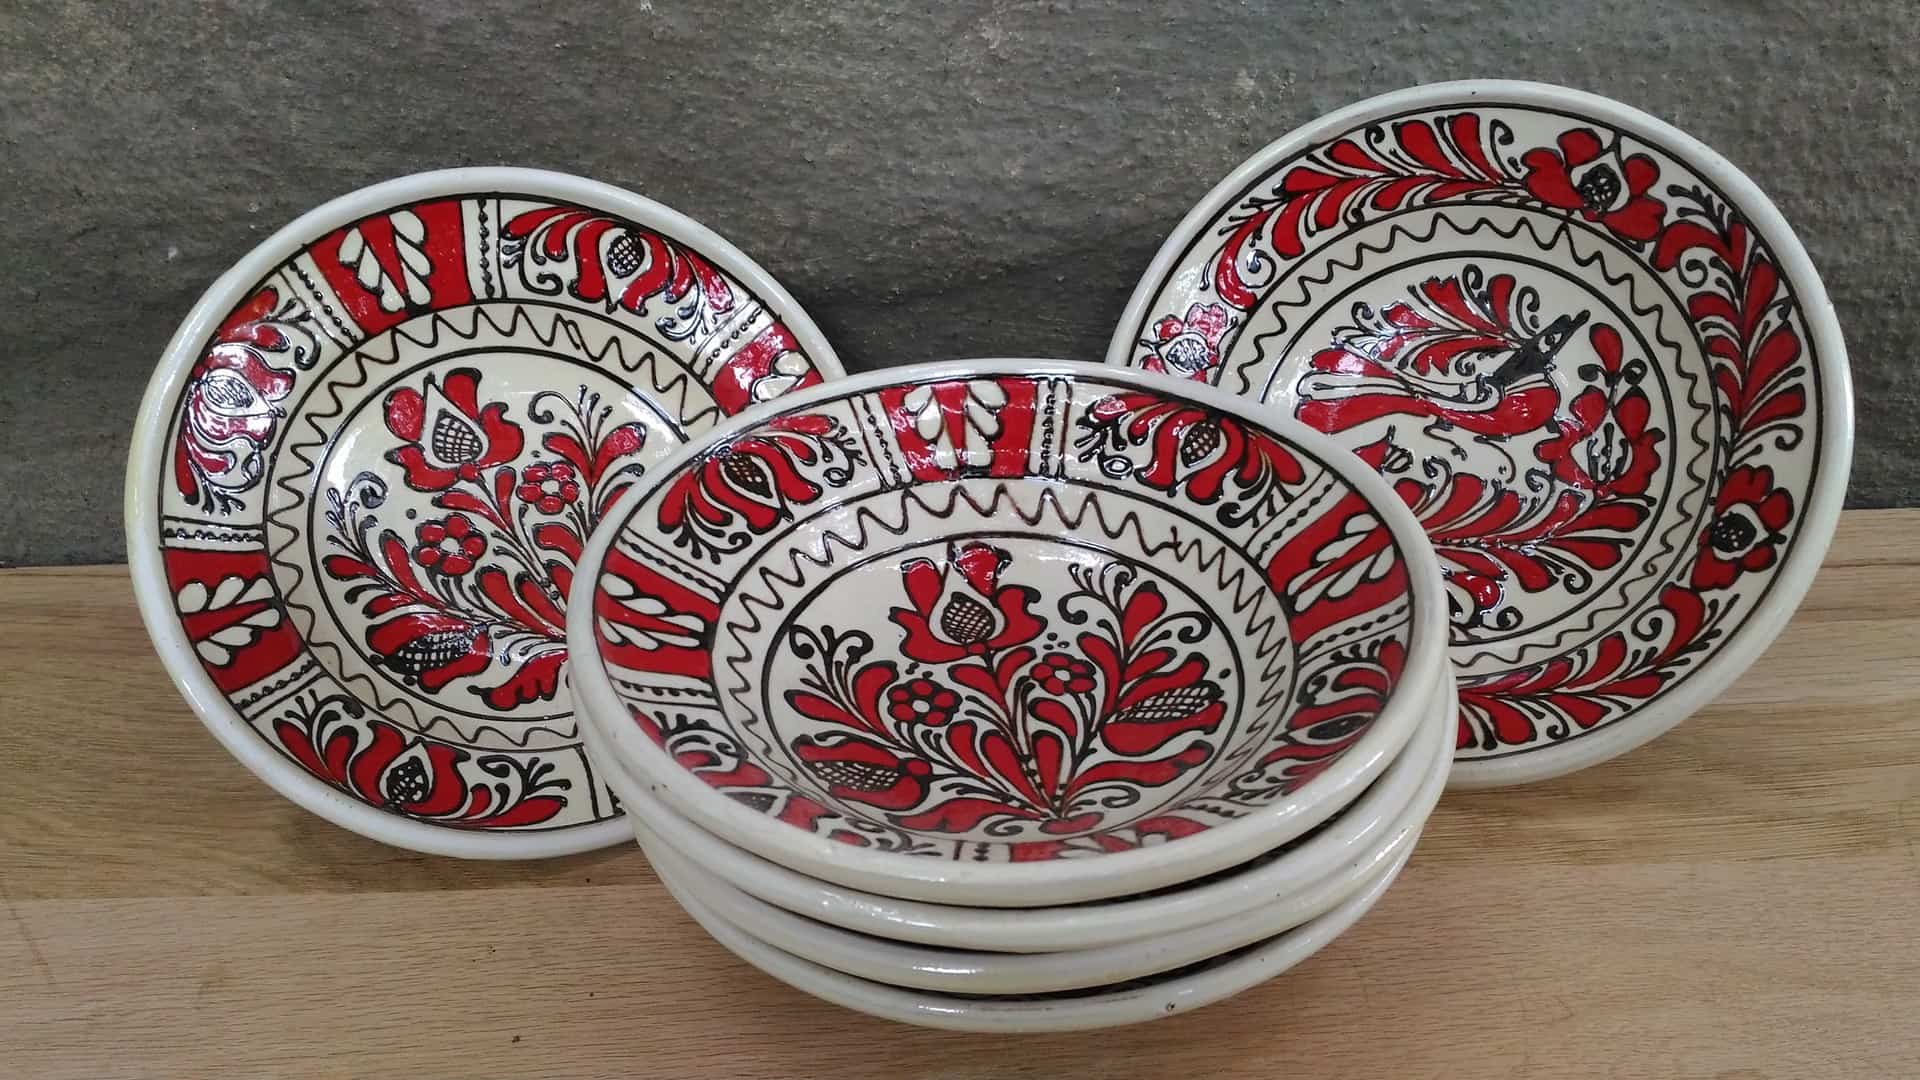 Expression dress up title Plates with Romanian traditional motifs | Shopping in Romania